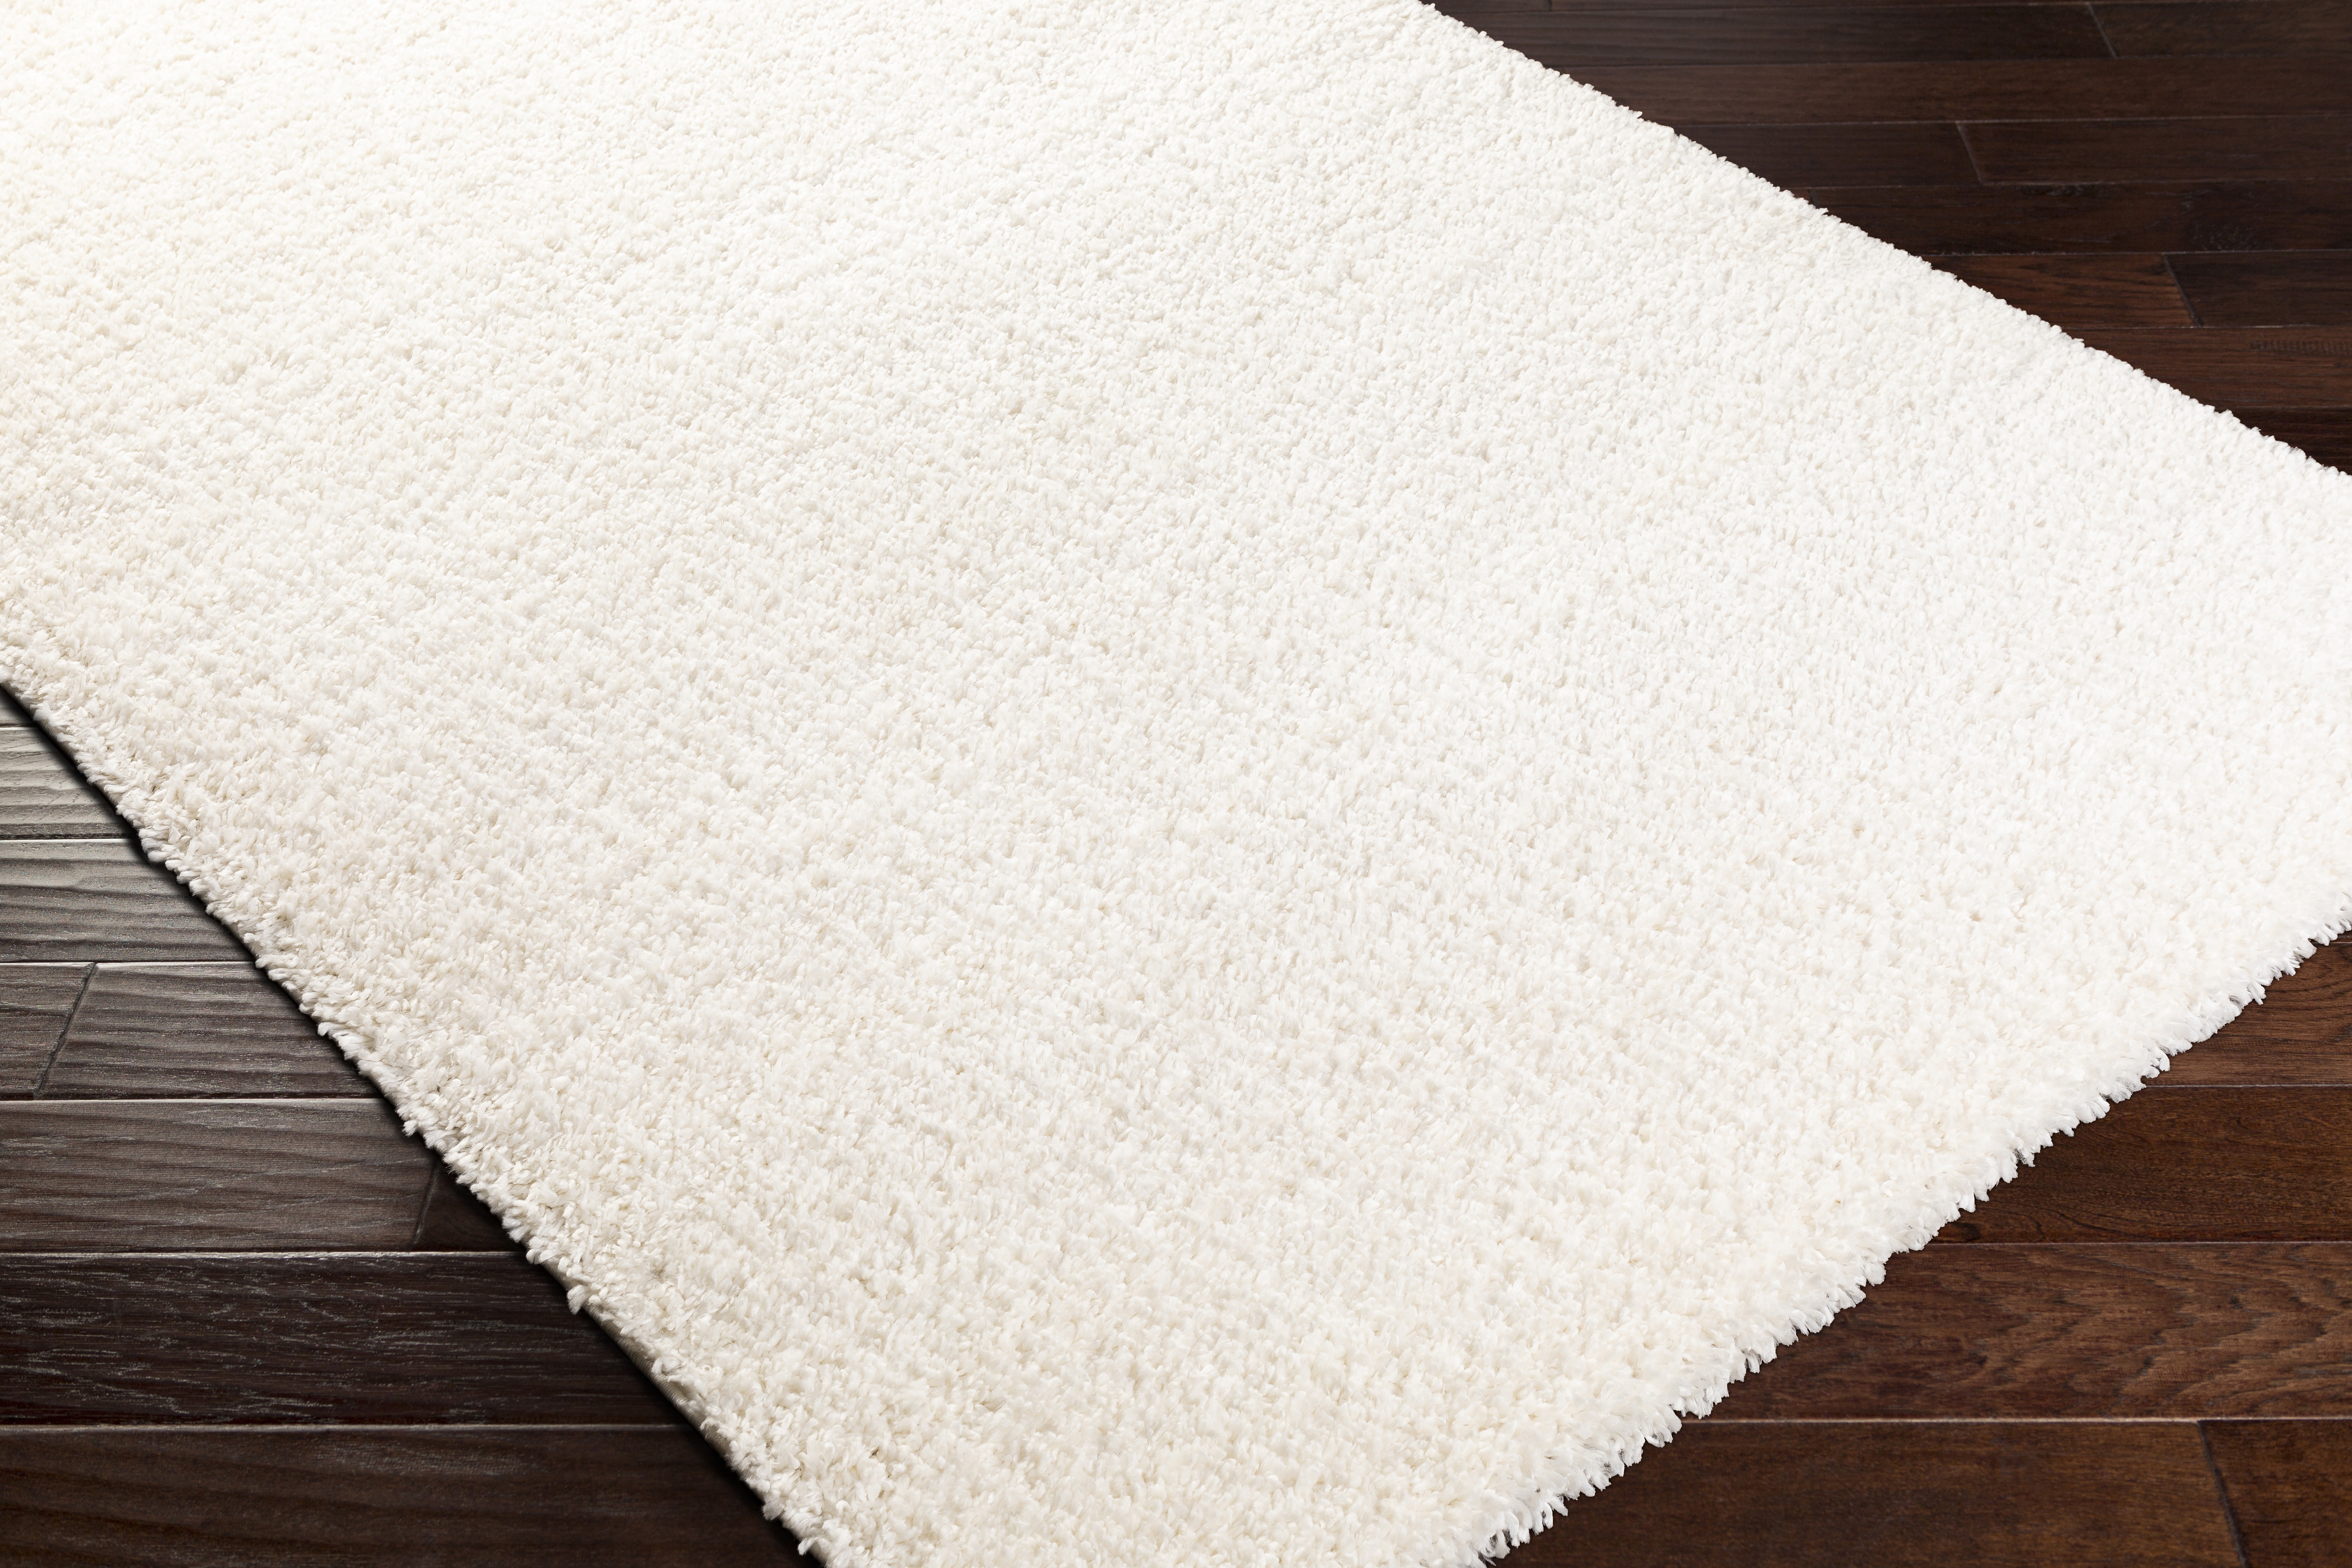 Deluxe Shag Rug, 7'10" x 10'2" - Image 6